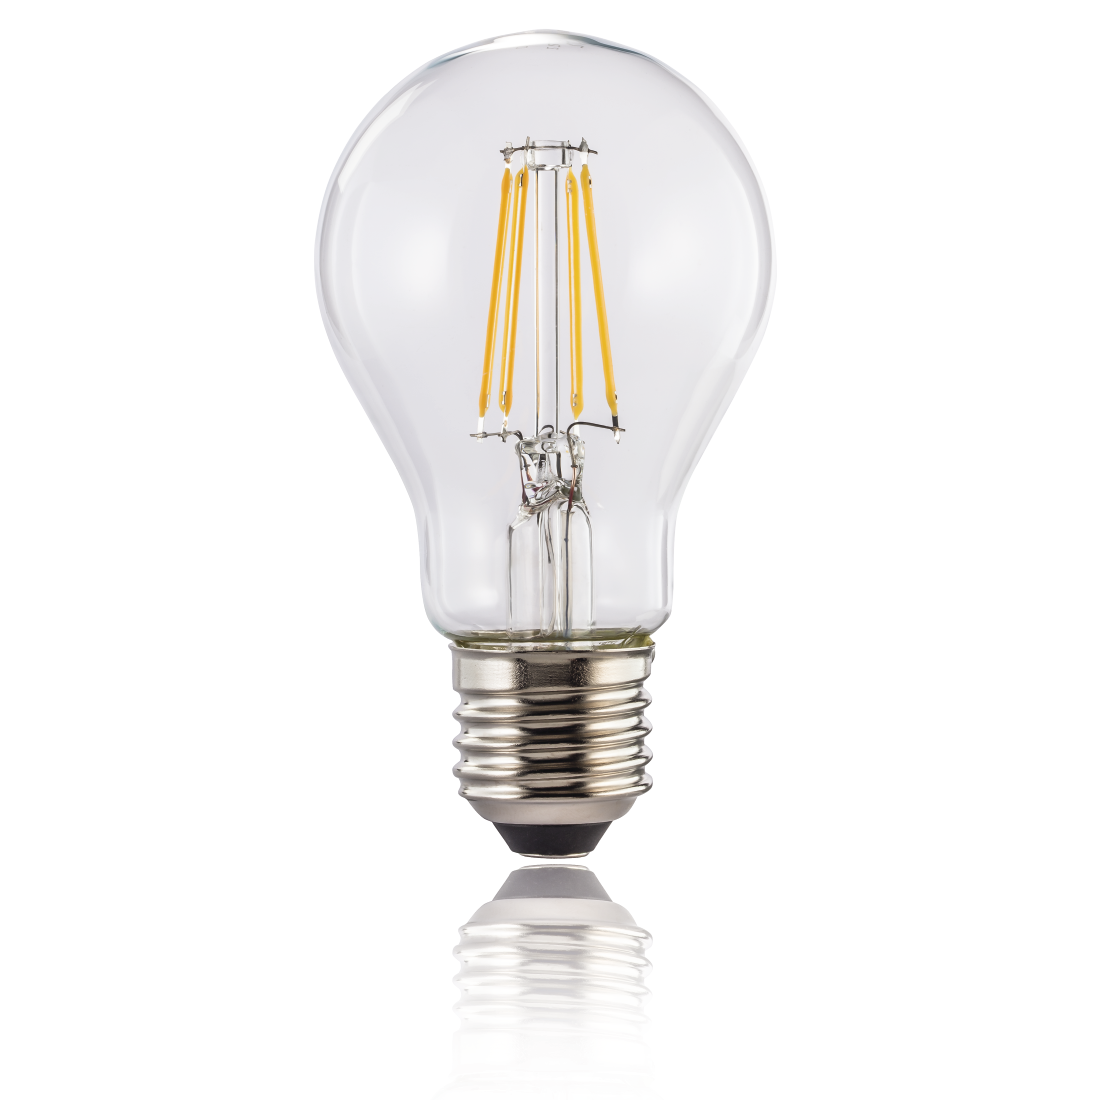 abx2 High-Res Image 2 - Xavax, LED Filament, E27, 1521 lm Replaces 100W, Incand. Bulb, warm white, clear, Dimmable